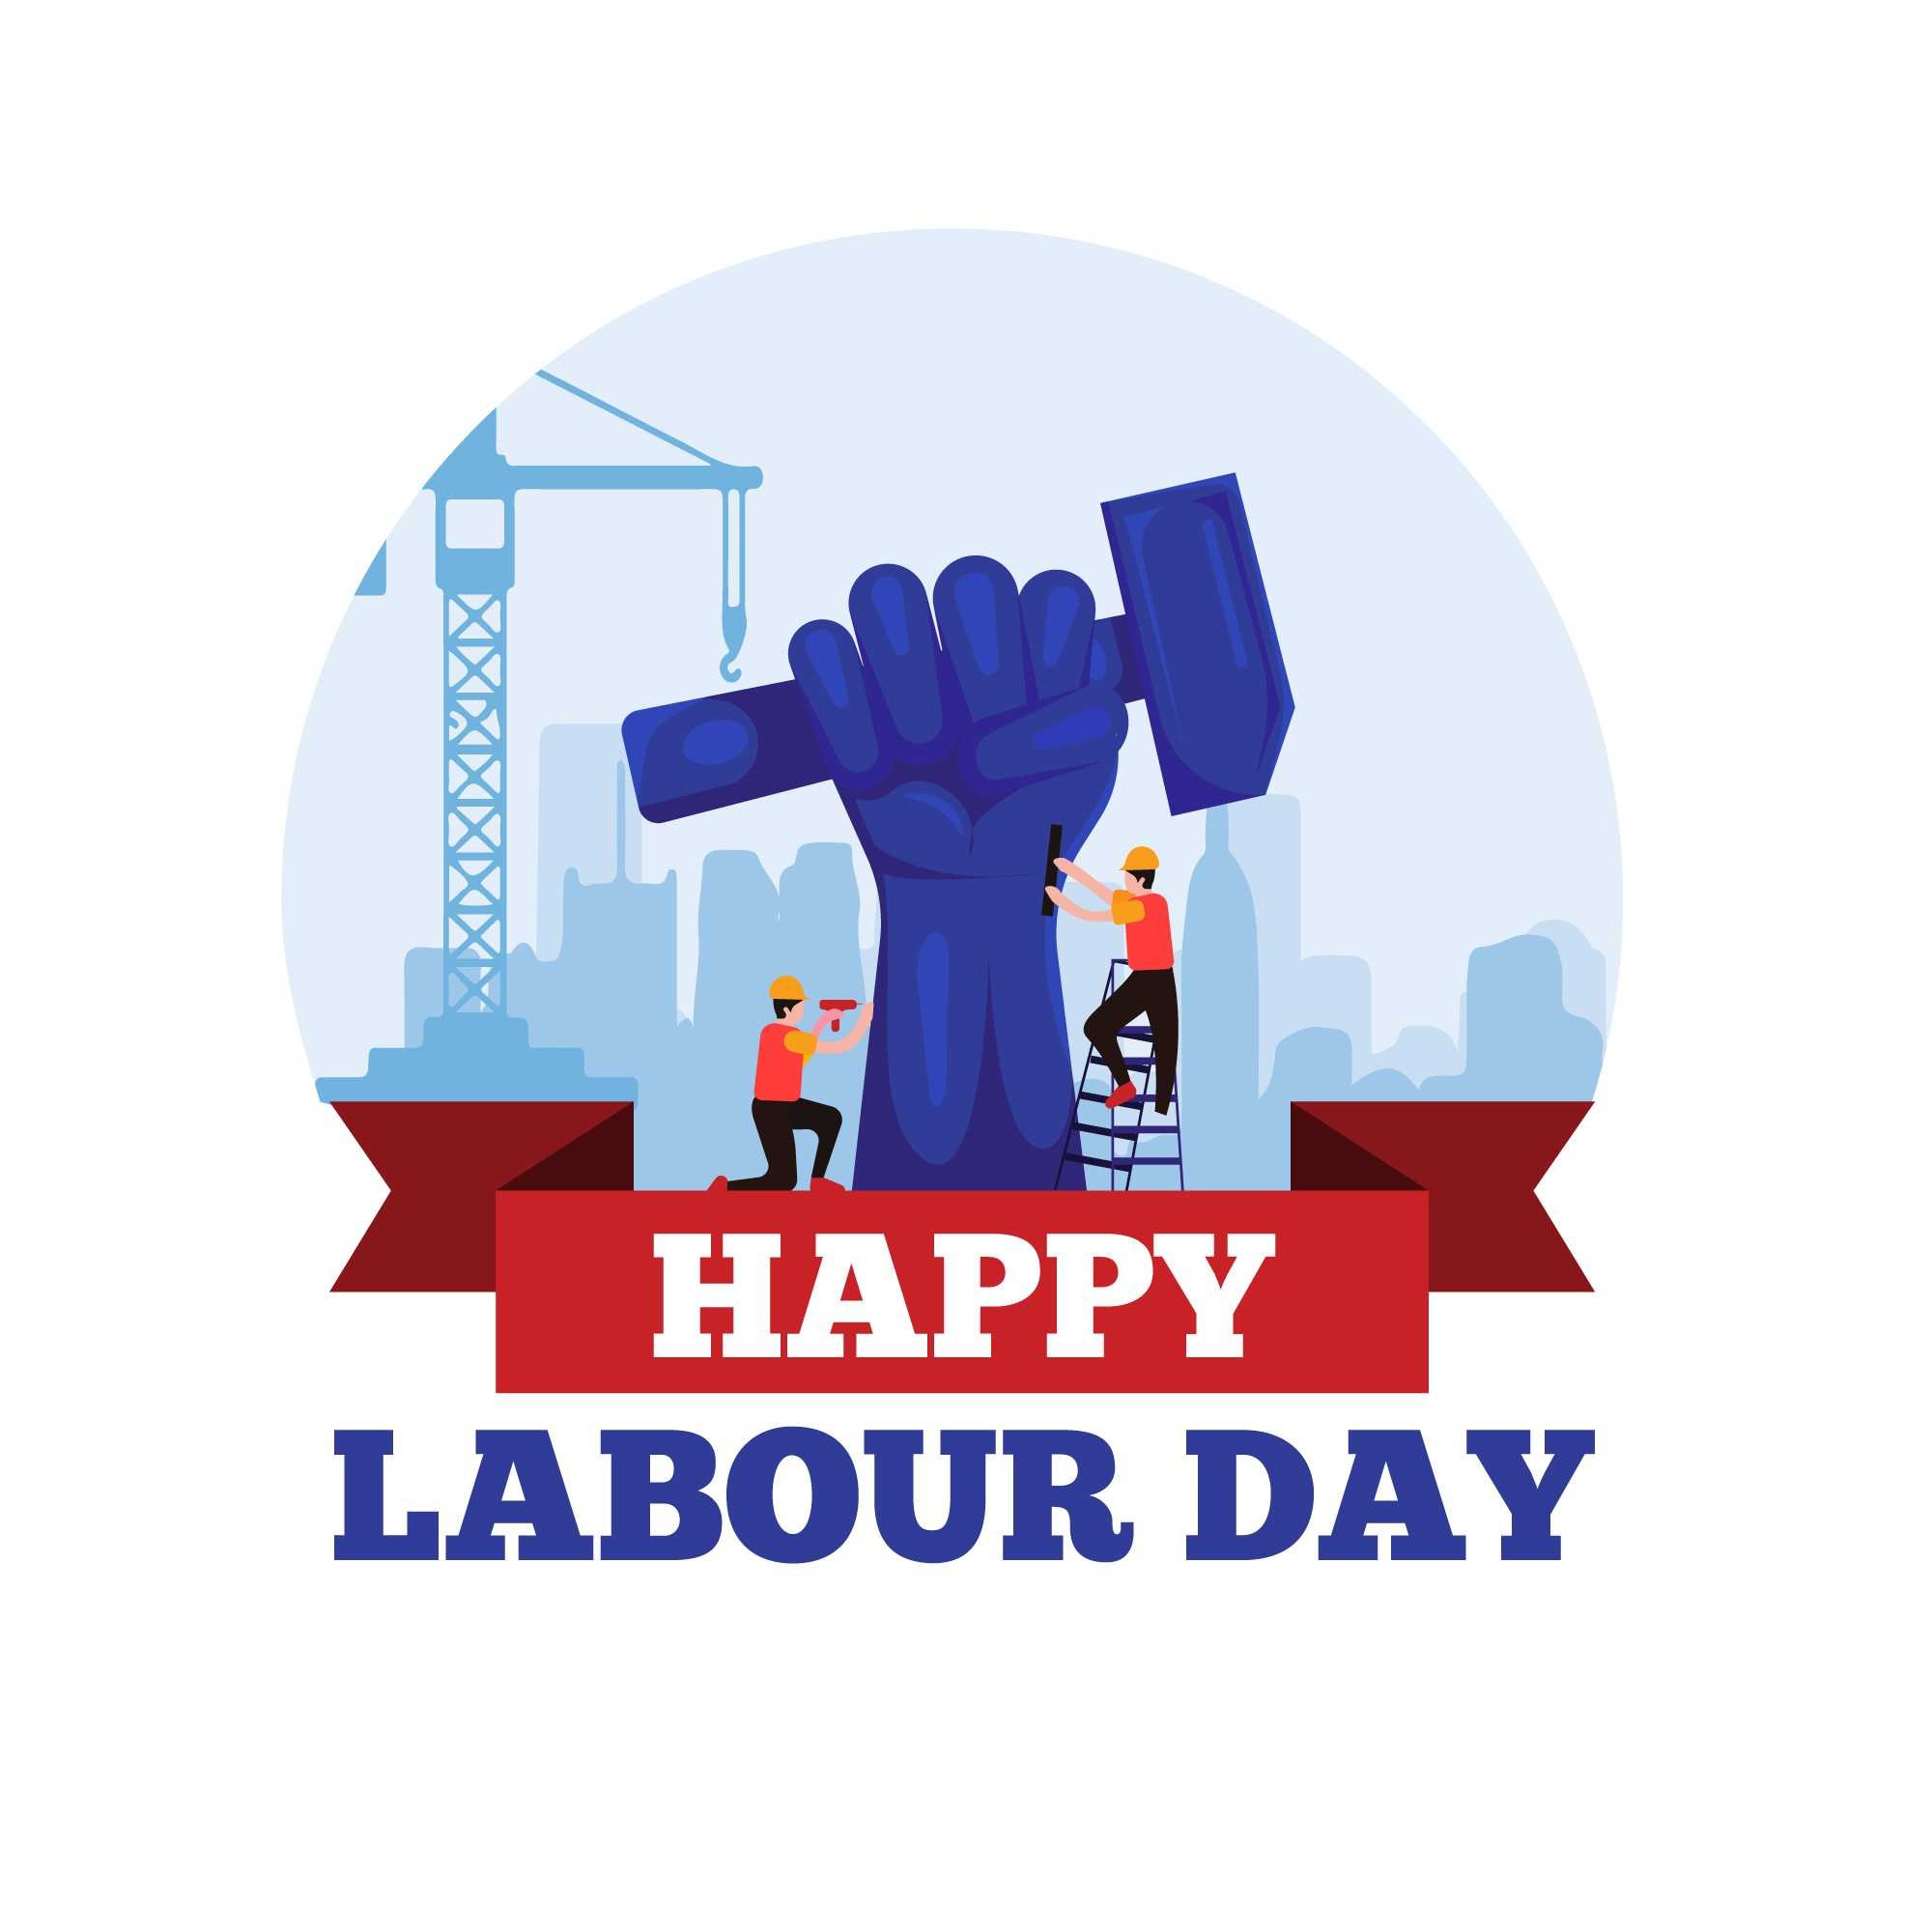 Labor Day Holiday, Happy labor day, HD image, Free download, 2000x2000 HD Handy